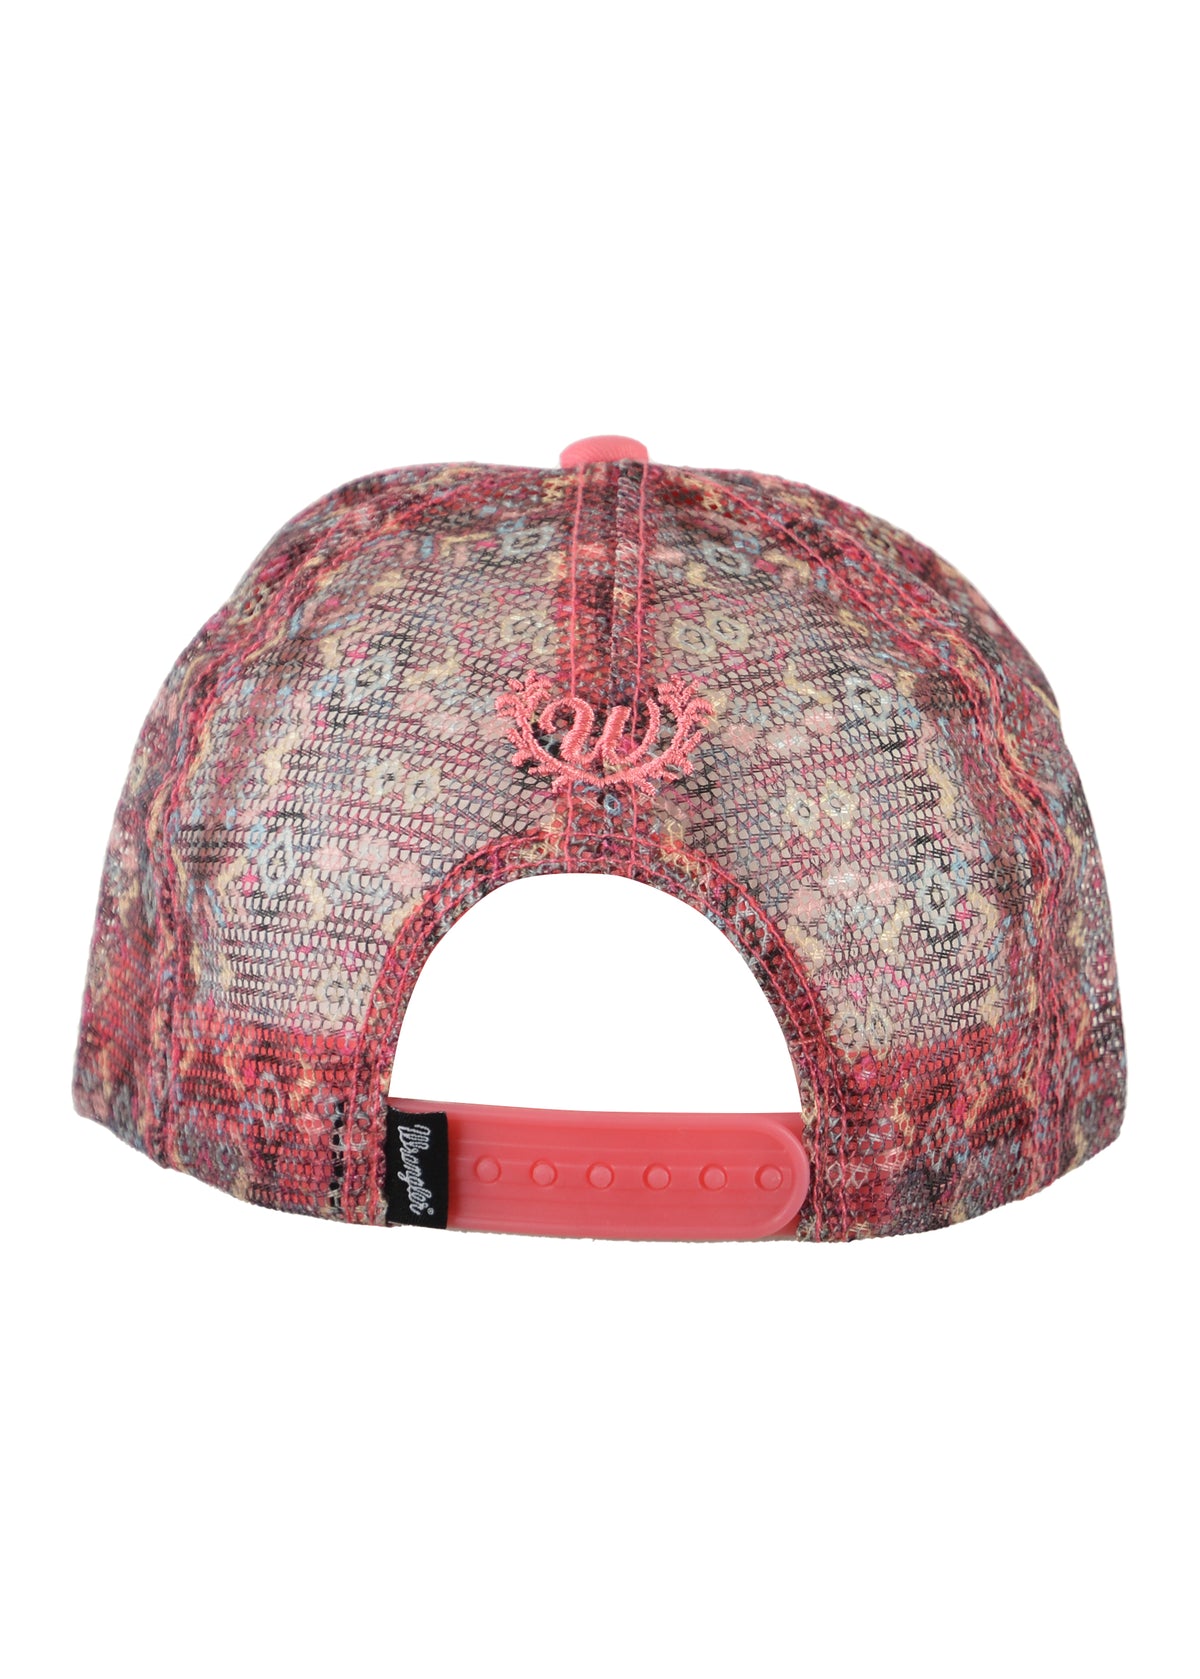 Wrangler Holly Square Front Trucker Cap - Coral